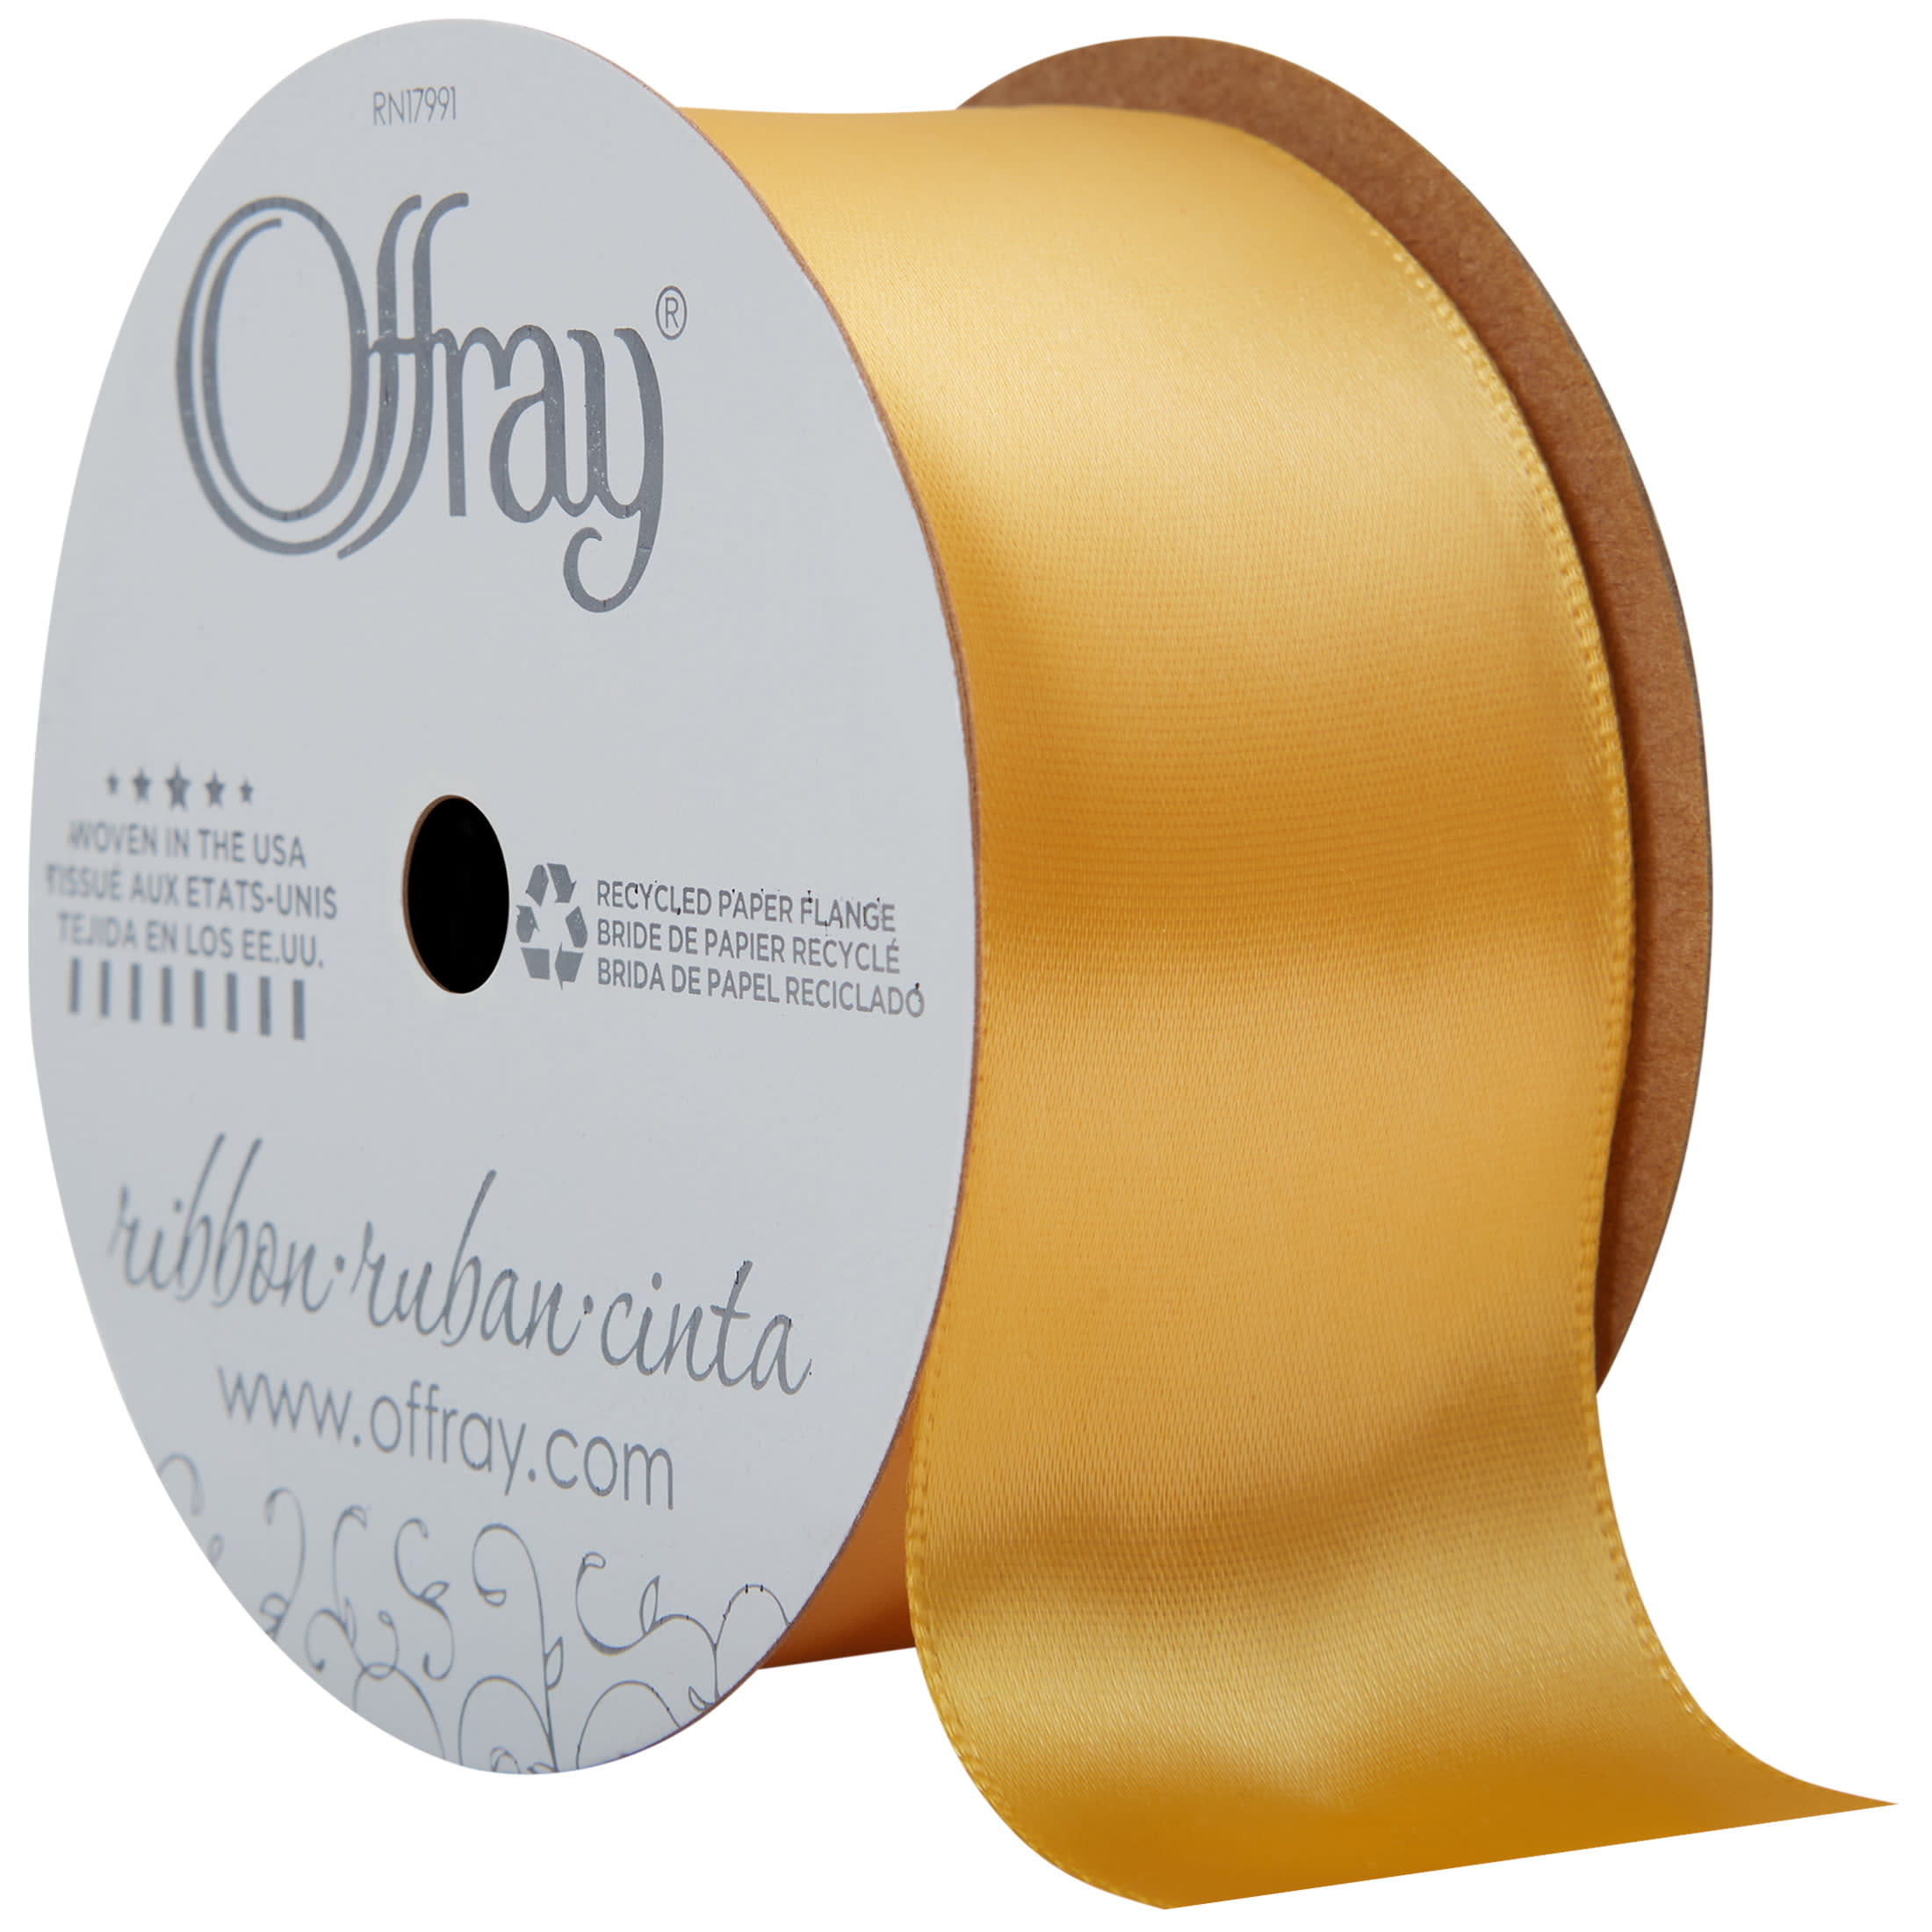 Offray Ribbon, Lemon Yellow 1 1/2 inch Single Face Satin Polyester Ribbon,  12 feet - DroneUp Delivery